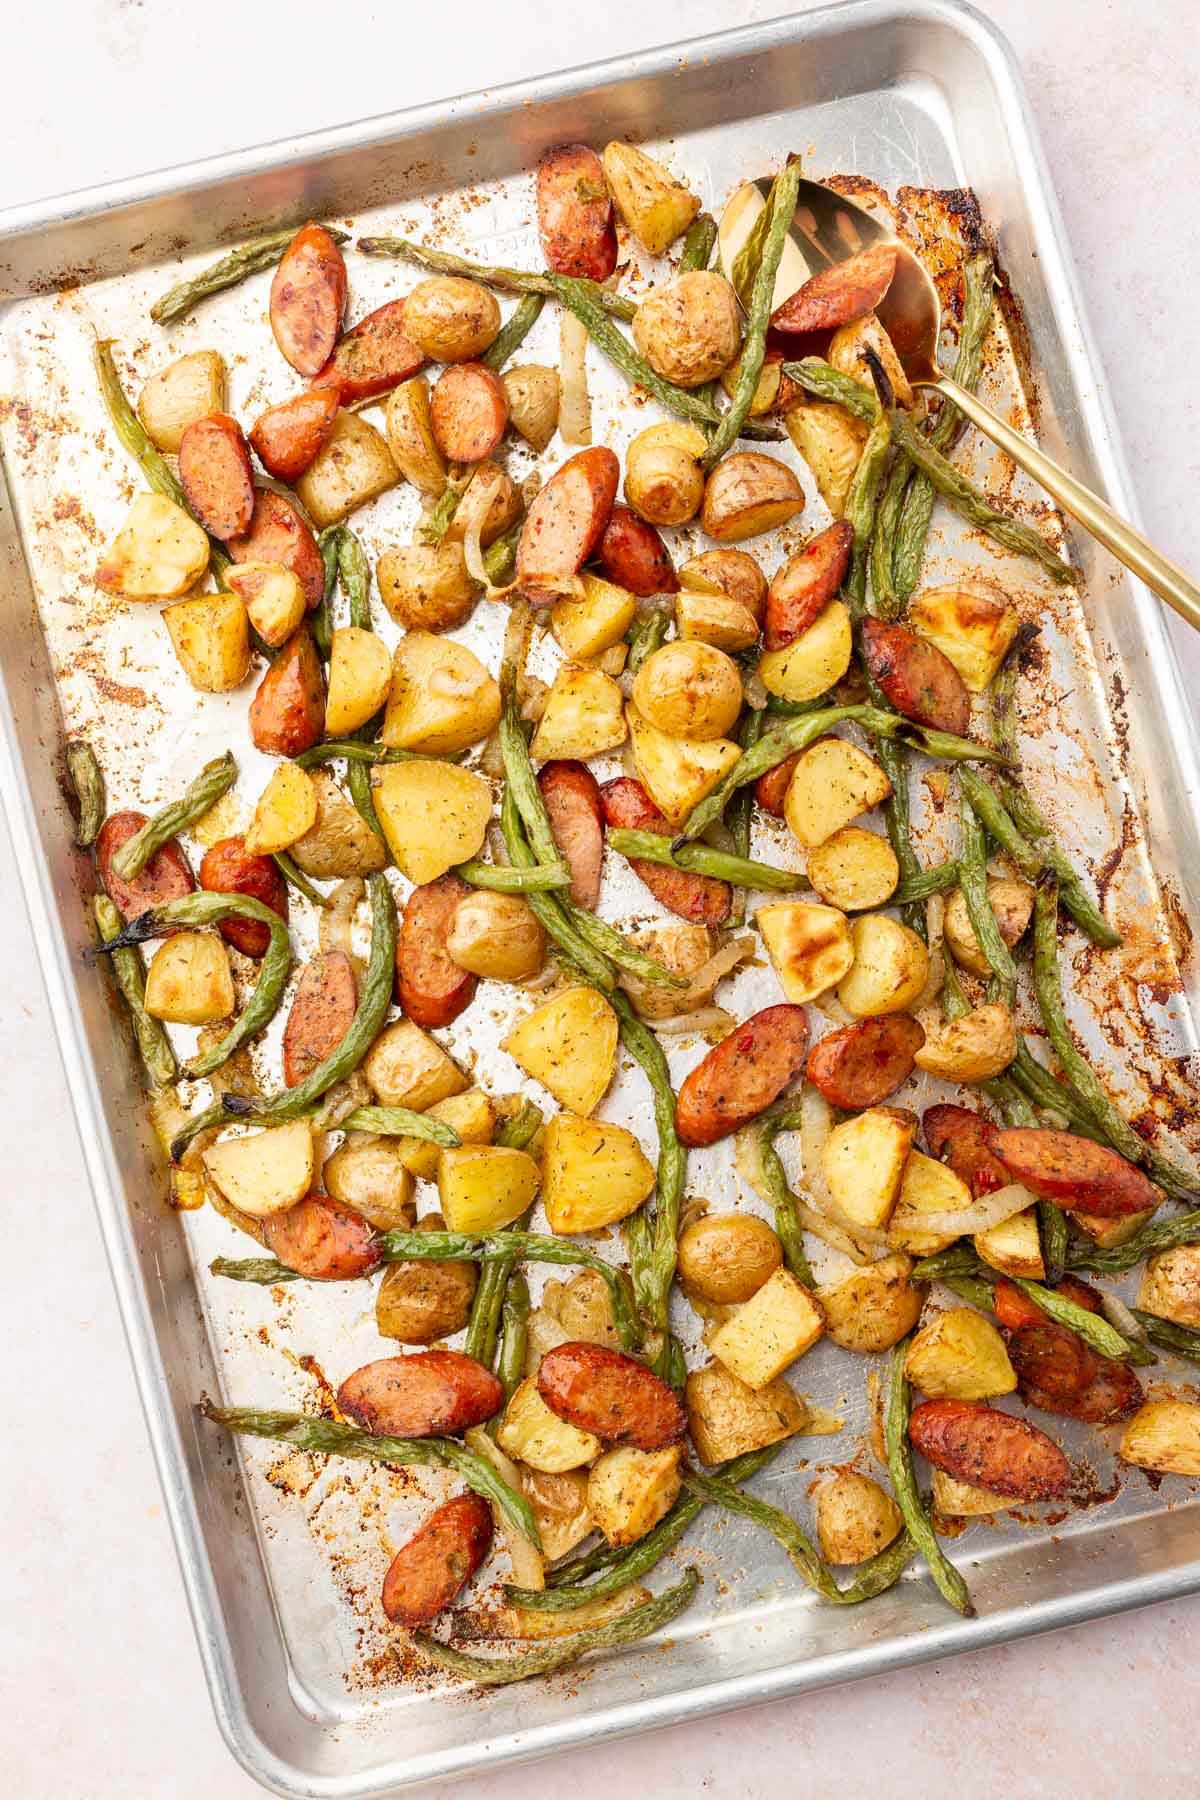 A sheet pan filled with roasted potatoes, sausage, and green beans.